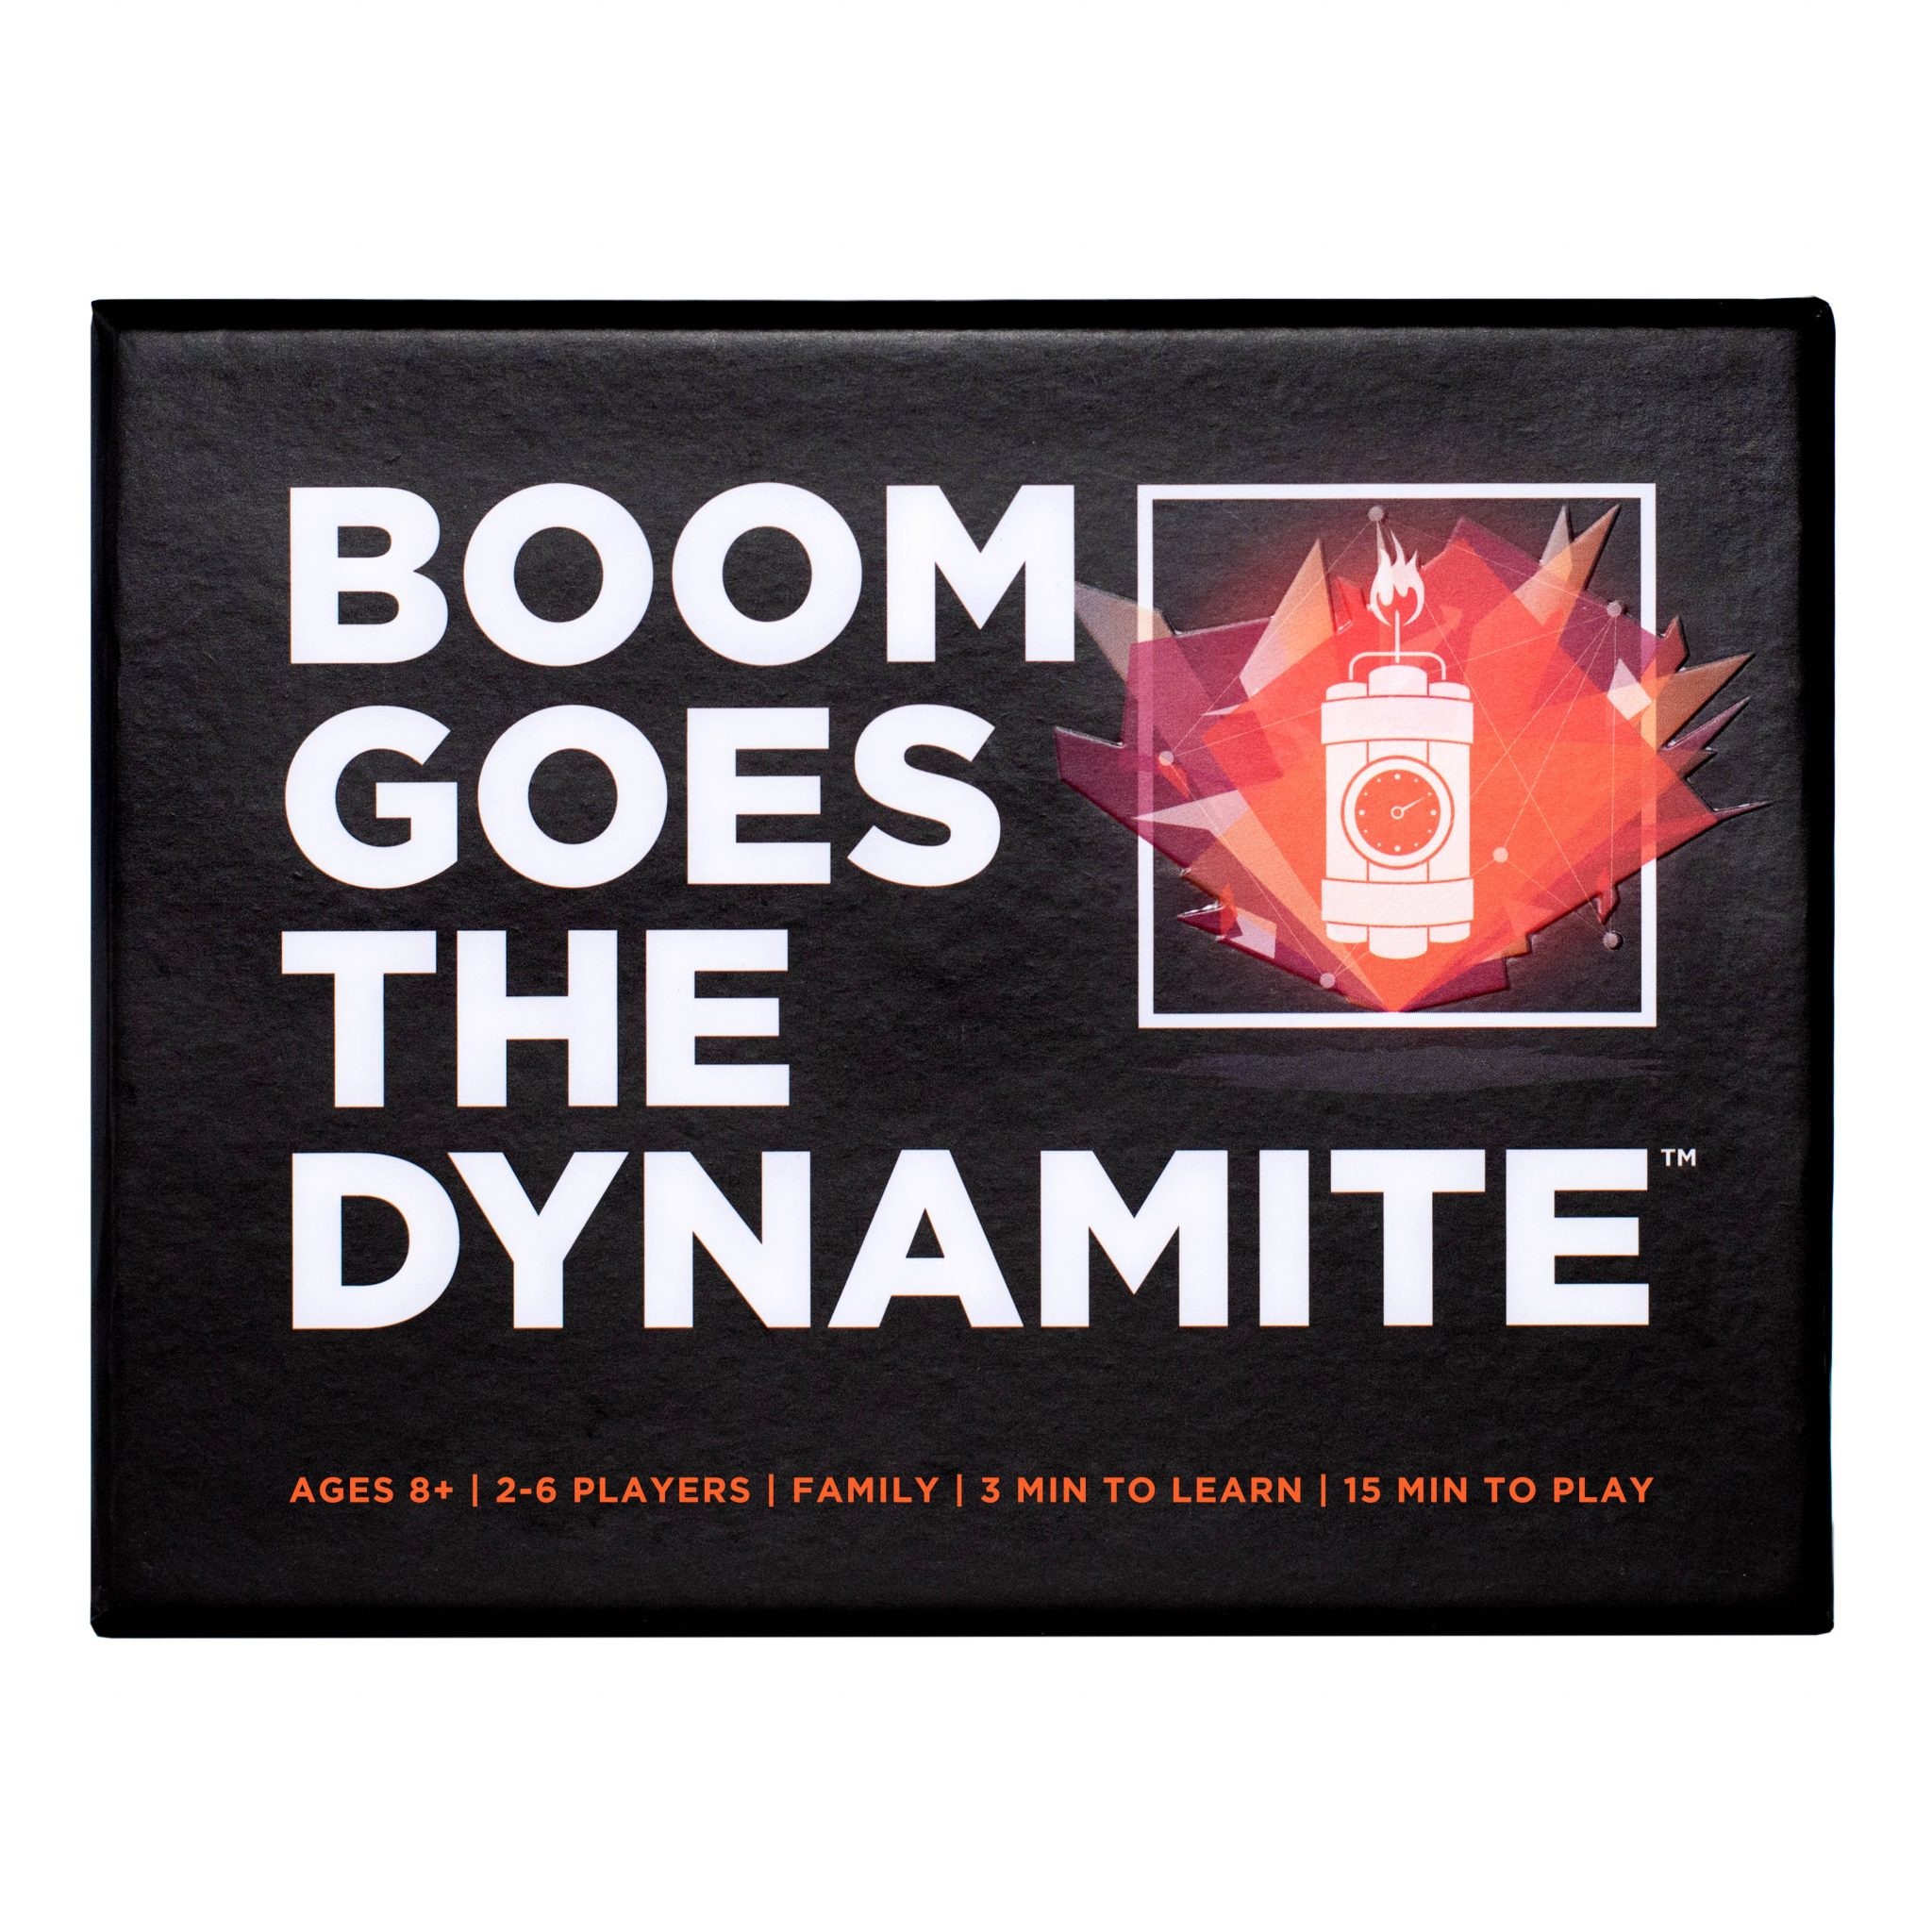 BOOM GOES THE DYNAMITE card game - Act Your Age (or don't)